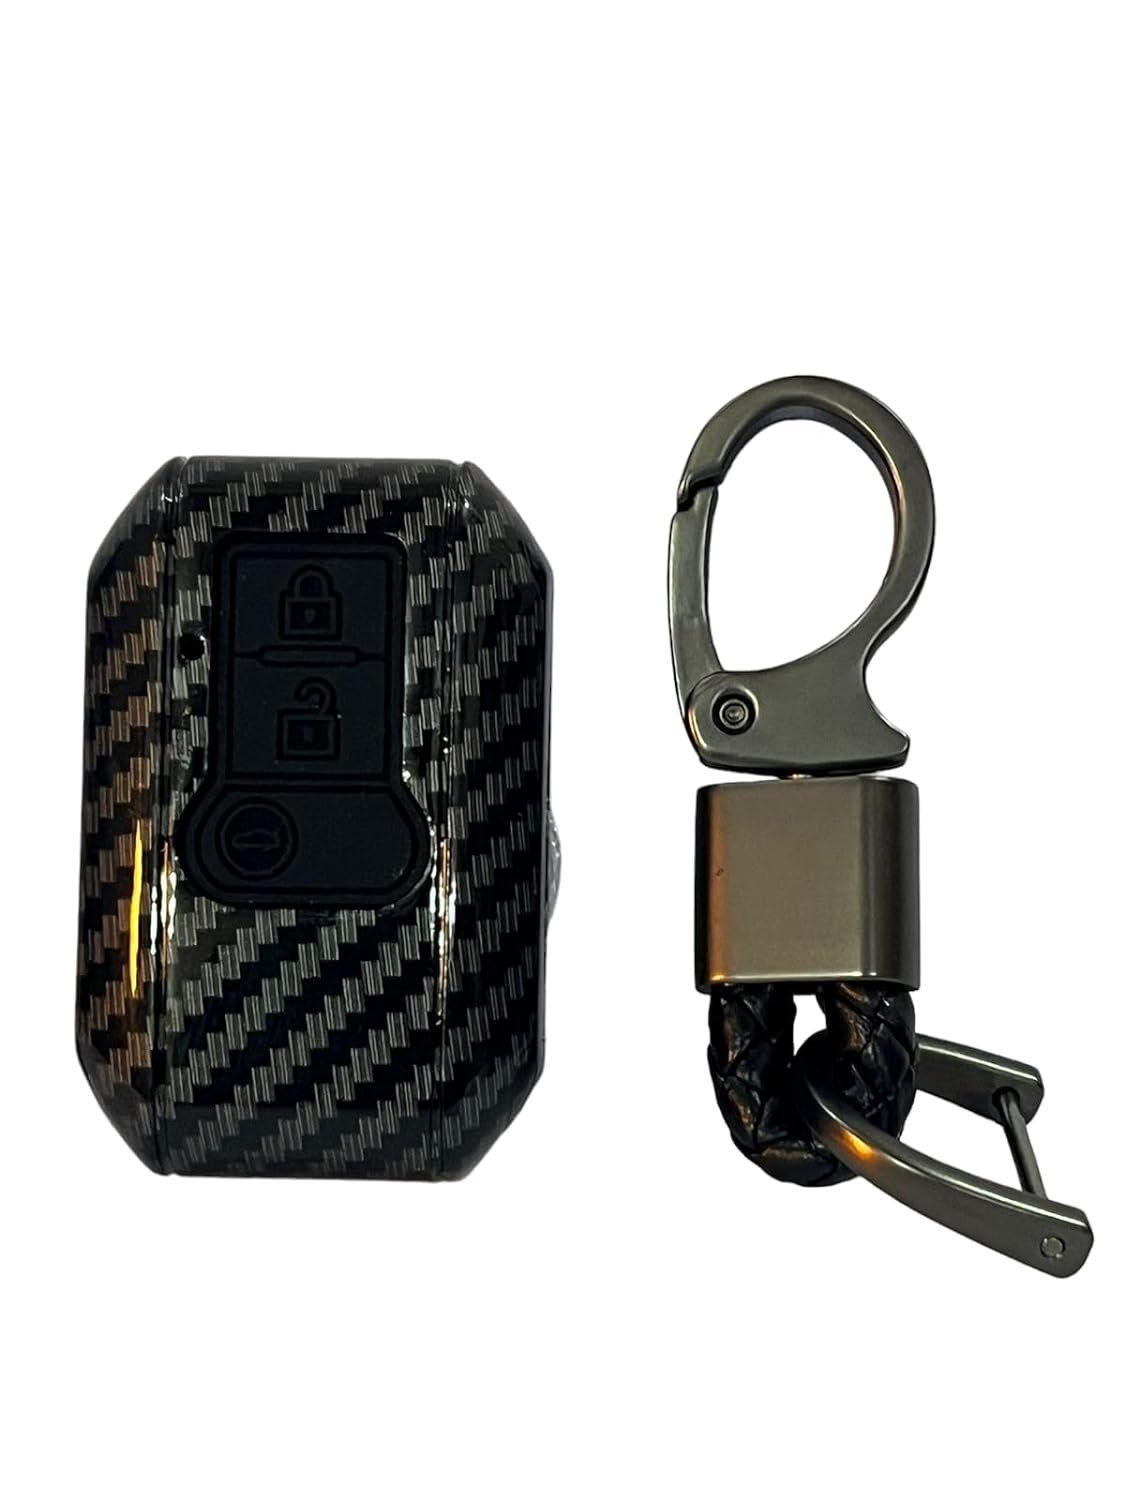 Carbon Fiber ABS Smart Key Cover Compatible with Maruti Suzuki Dzire Swift Ertiga - Push Button Start CAR Key ONLY (Key Chain Included) Image 